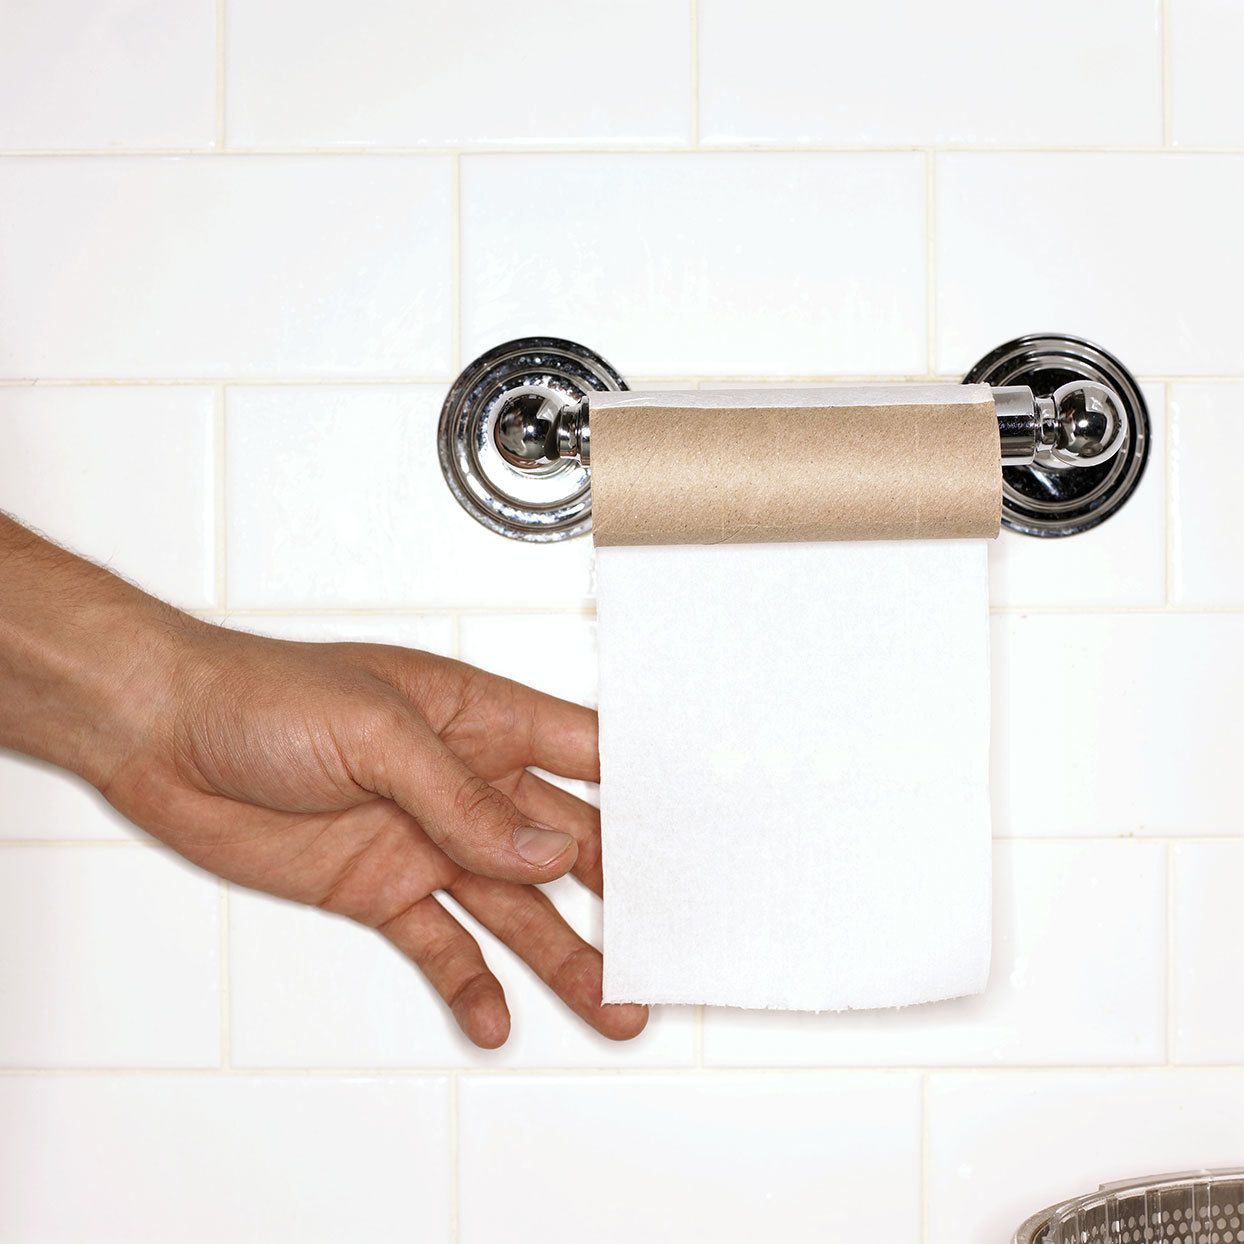 A hand reaches for the last piece of toilet paper on roll